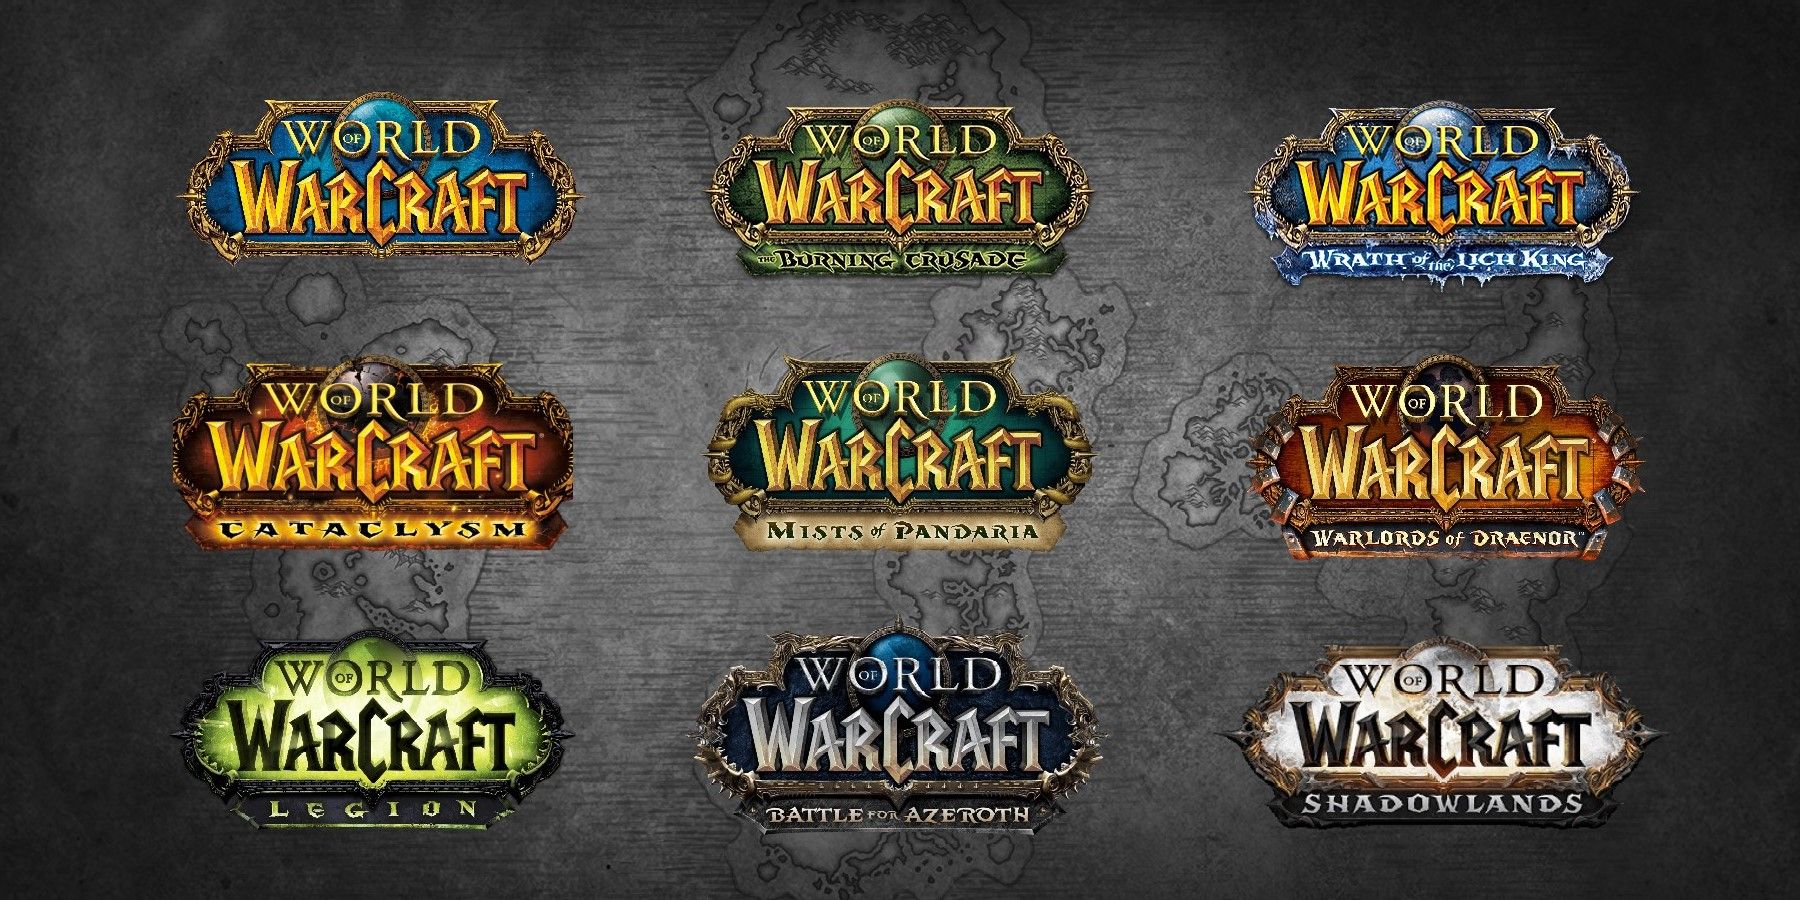 What WoW Classic Plus is differs for each World of Warcraft fan